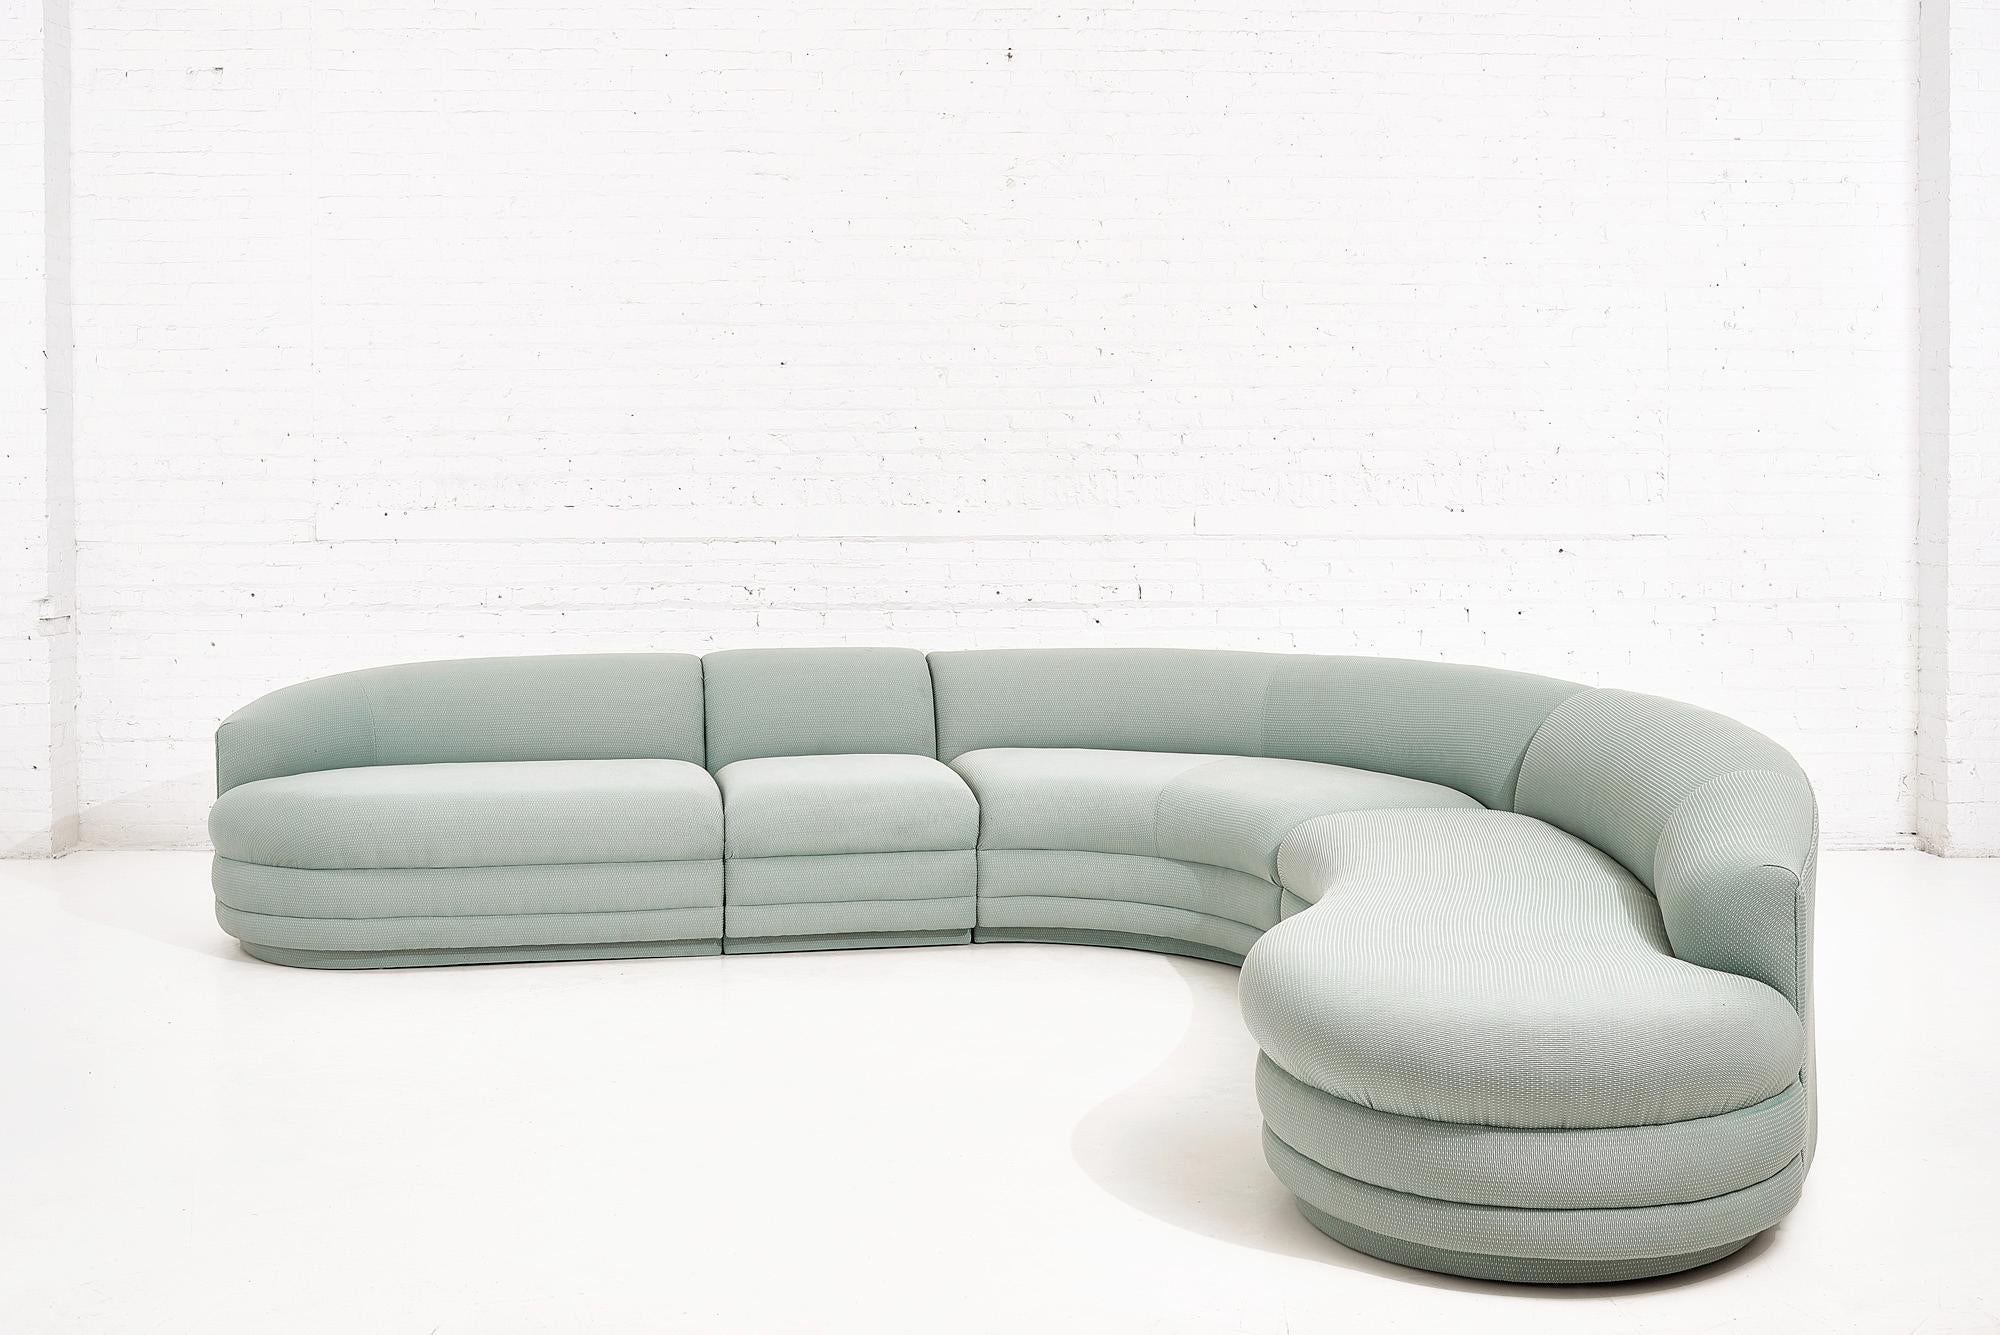 Vladimir Kagan for Preview 4 piece Sectional Sofa, 1988 In Good Condition For Sale In Chicago, IL